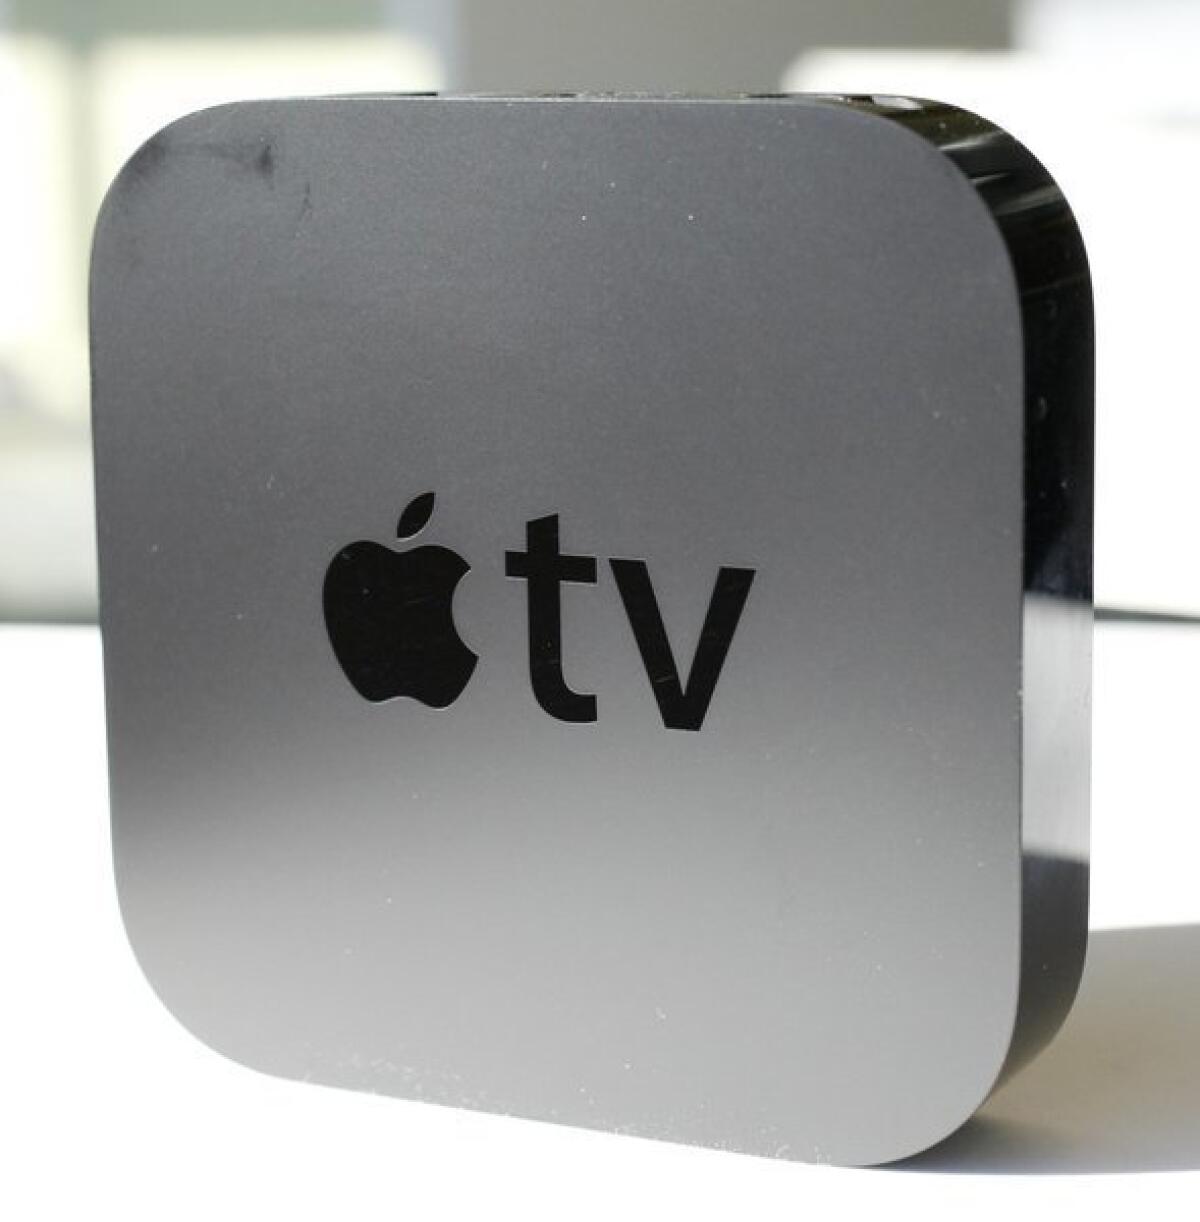 Apple CEO Tim Cook hints that the company plans to make its own TV set. The firm currently sells its Apple TV device, above, which connects to a TV.